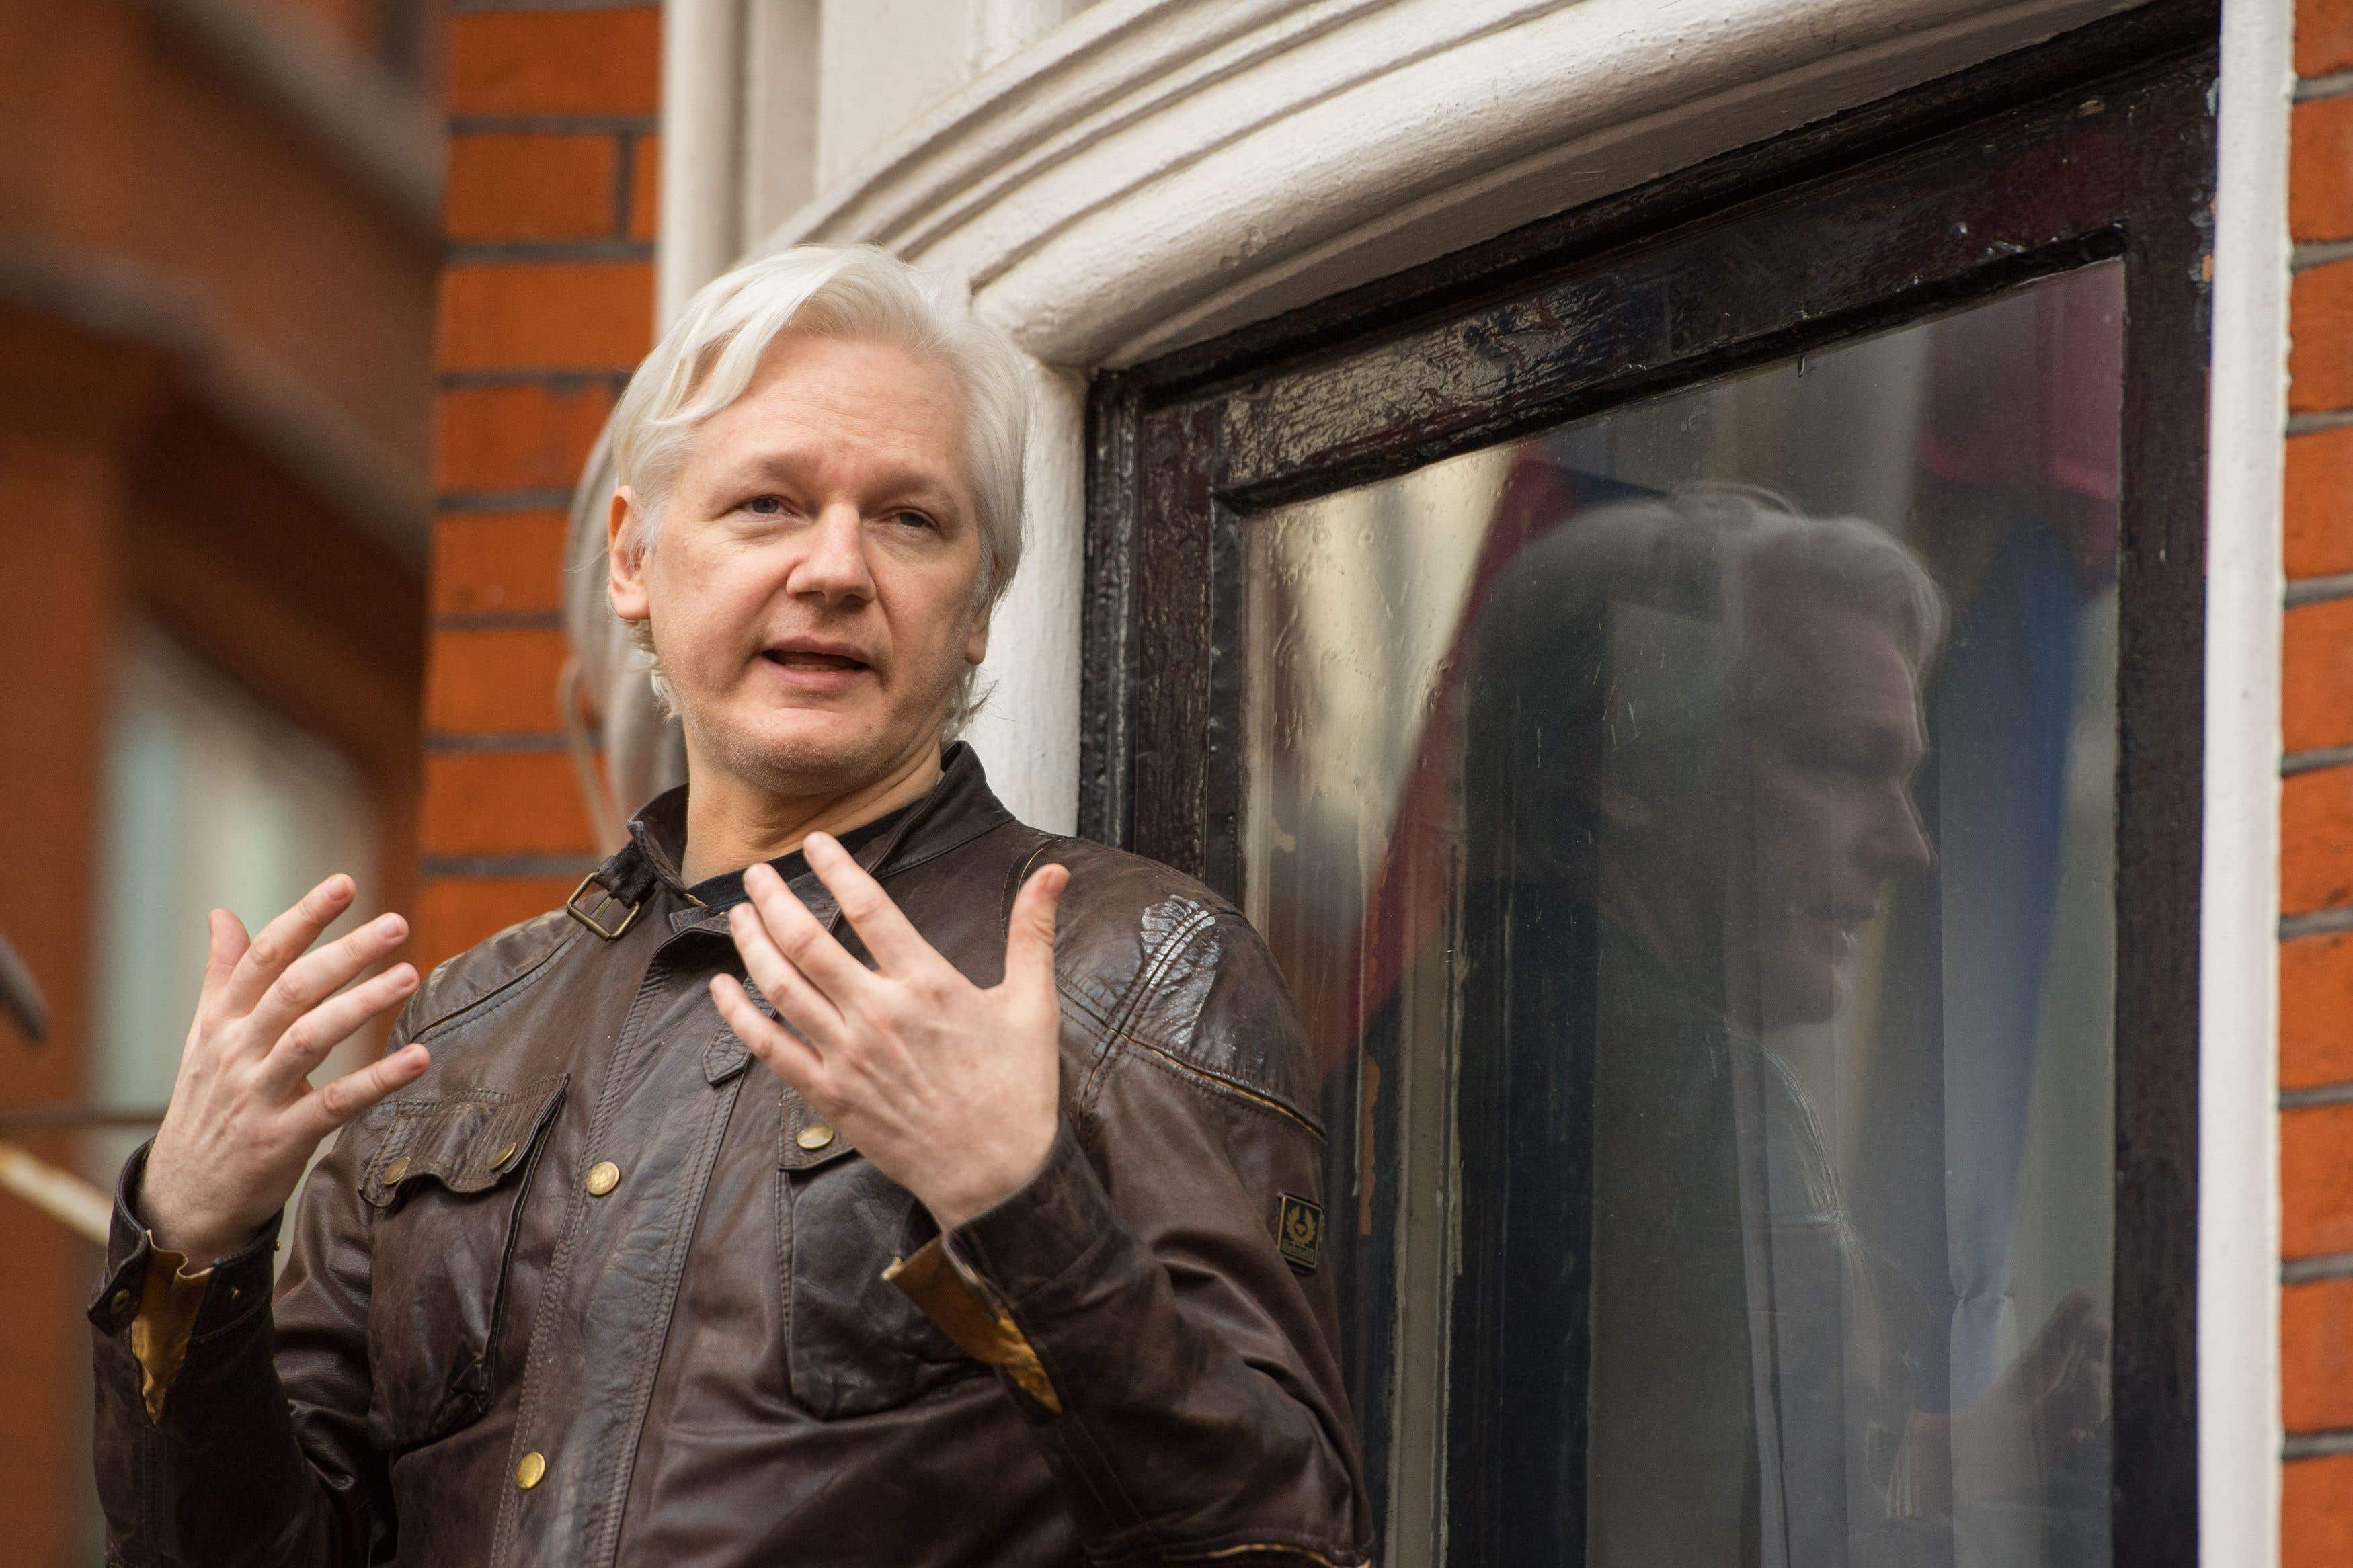 Should Assange, an Australian citizen, be extradited to America?